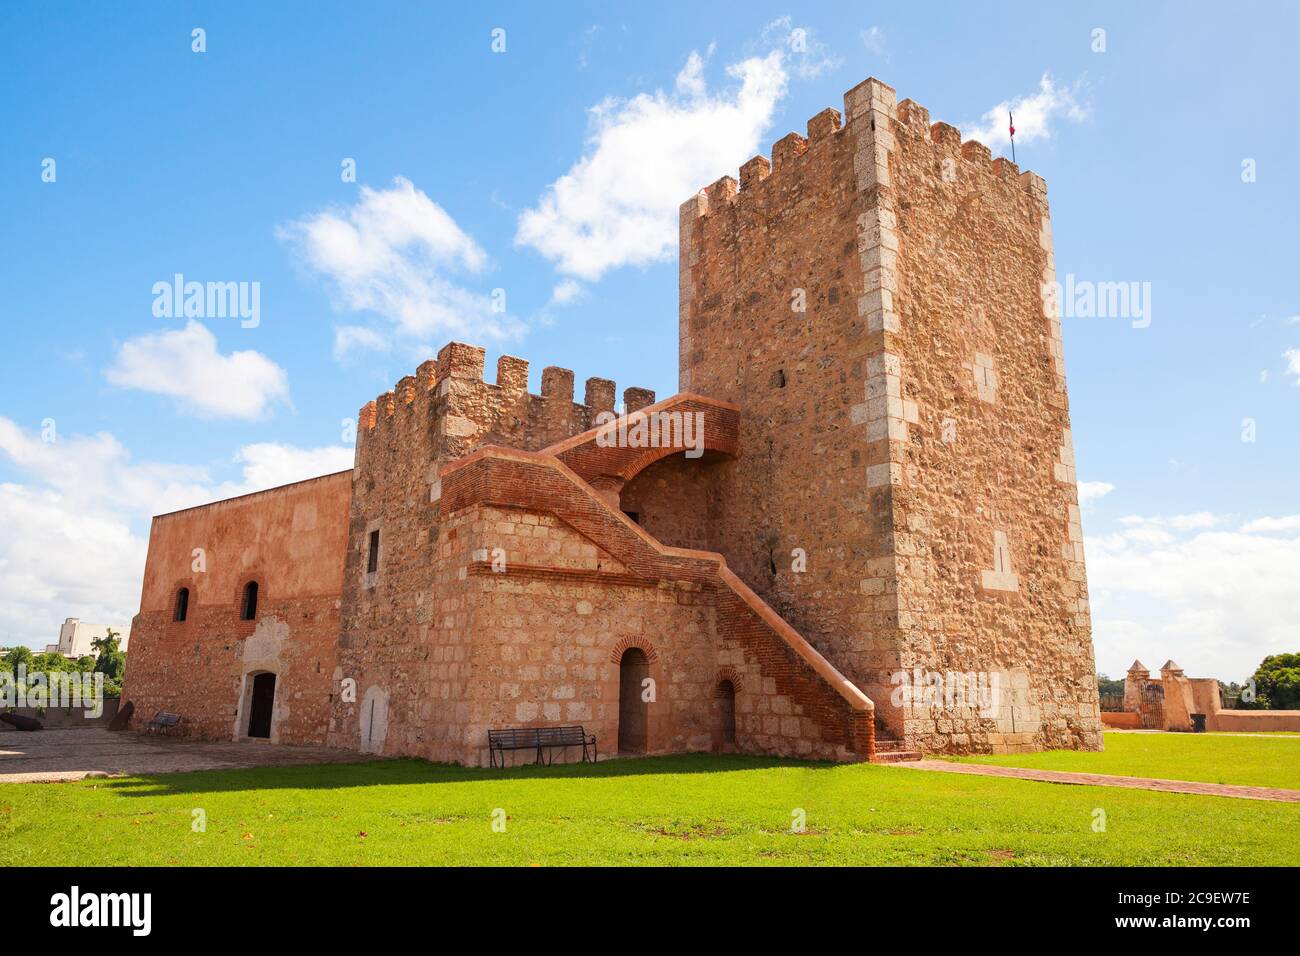 Exterior of The Fortaleza Ozama or Ozama Fortress, it is a sixteenth-century castle in Santo Domingo, Dominican Republic Stock Photo